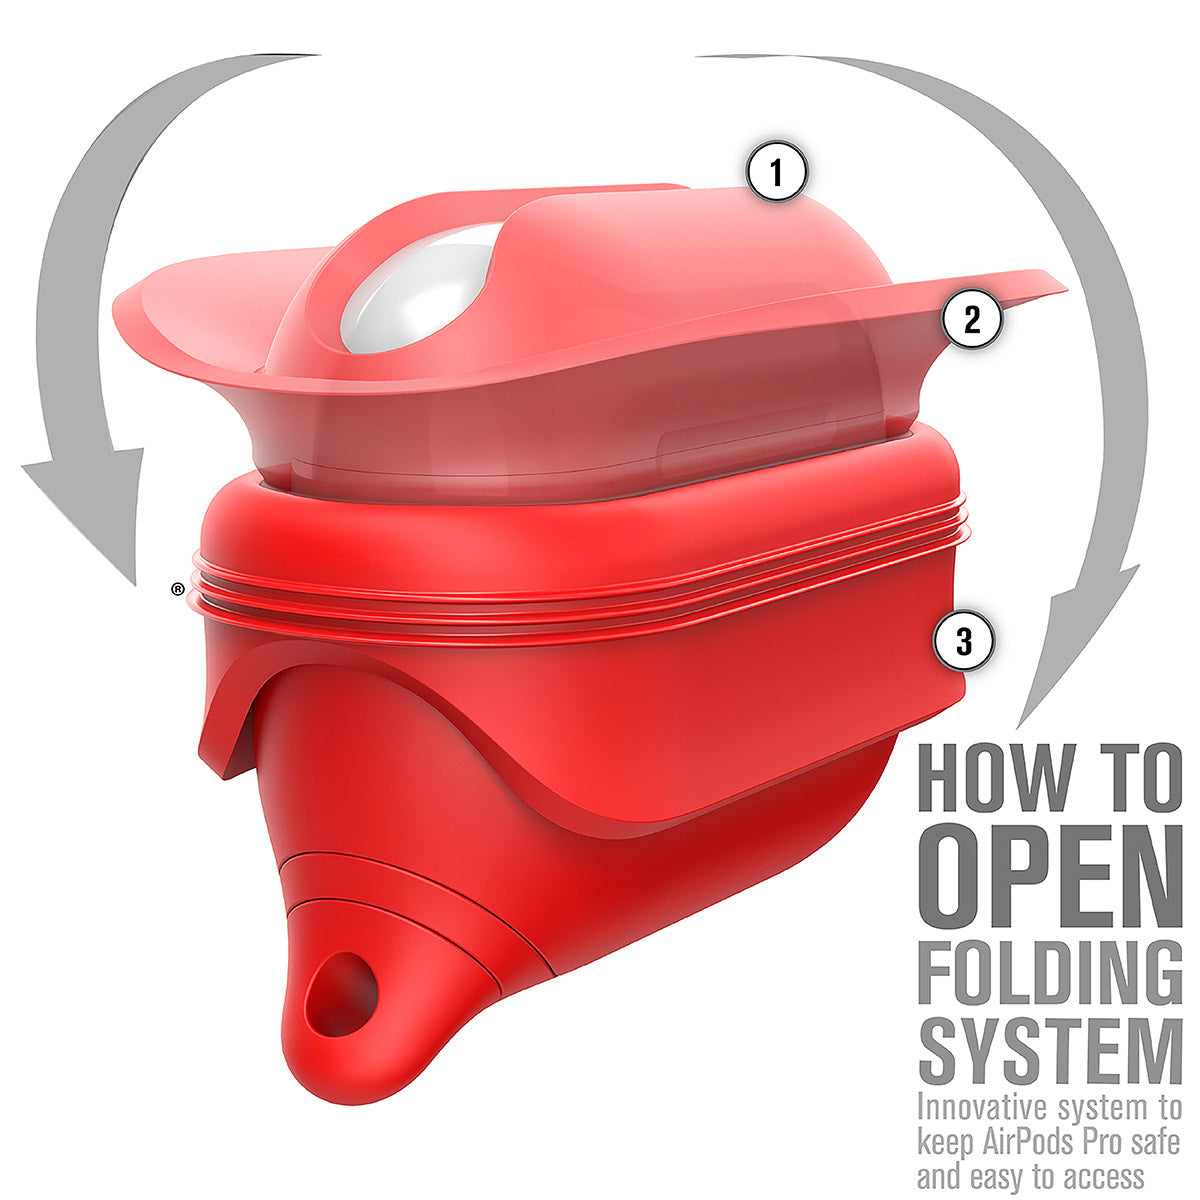 catalyst airpods pro gen 2 1 waterproof case carabiner special edition red with arrows on how to open the case text reads how to open folding system innovative system to keep airpods pro safe and easy to access